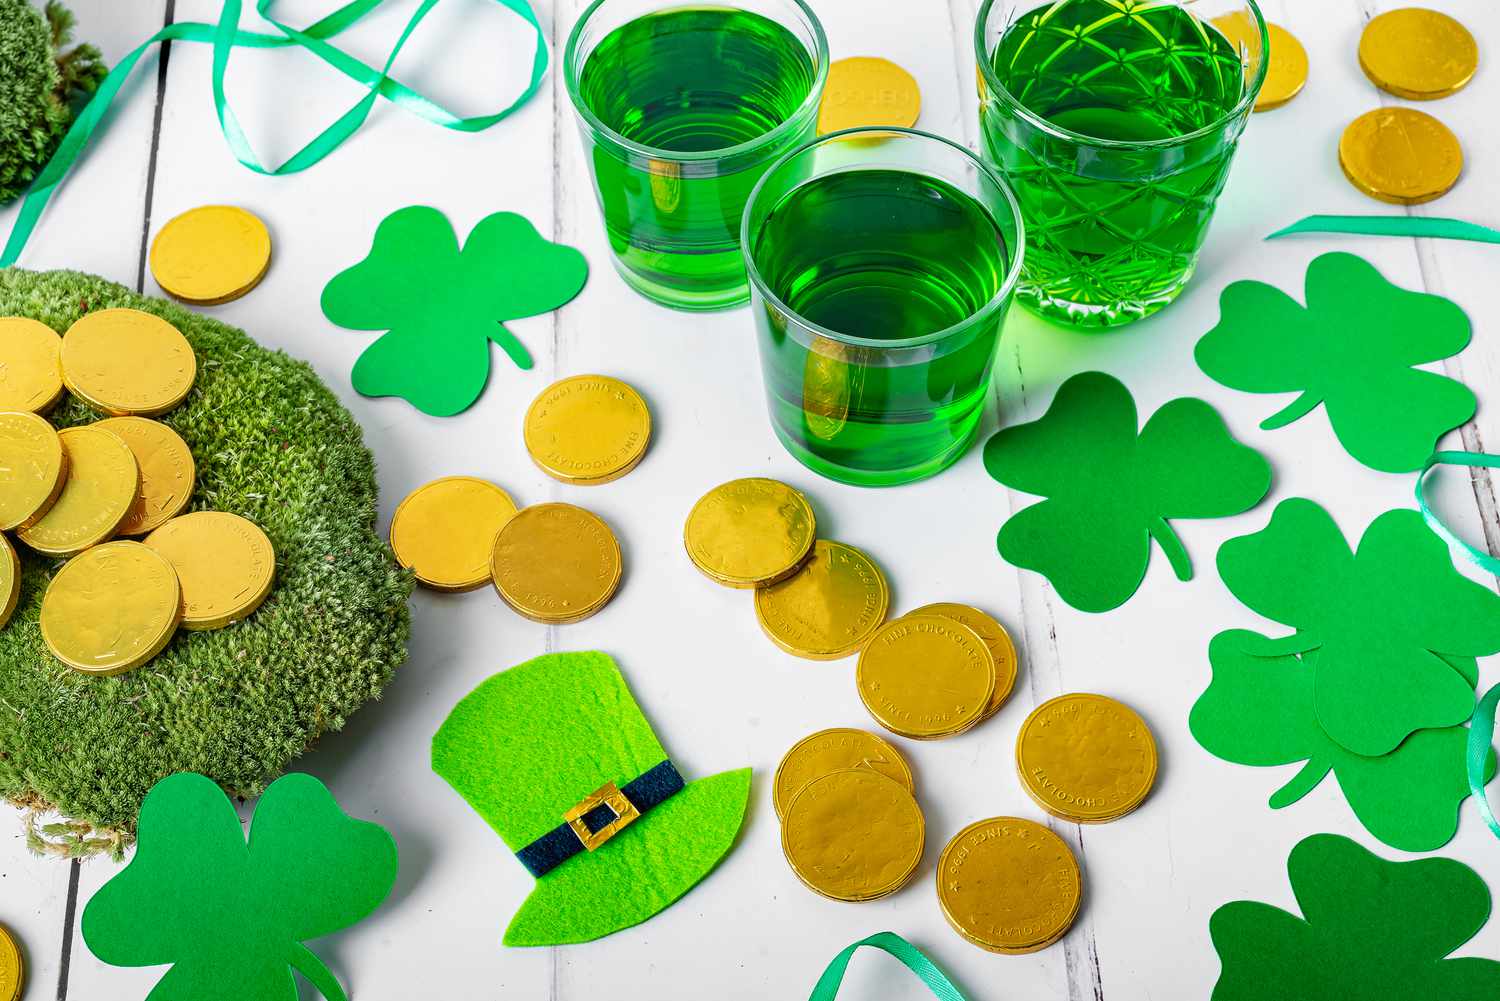 What Irish Mythological Creature Are You? St. Patrick's Day green drinks